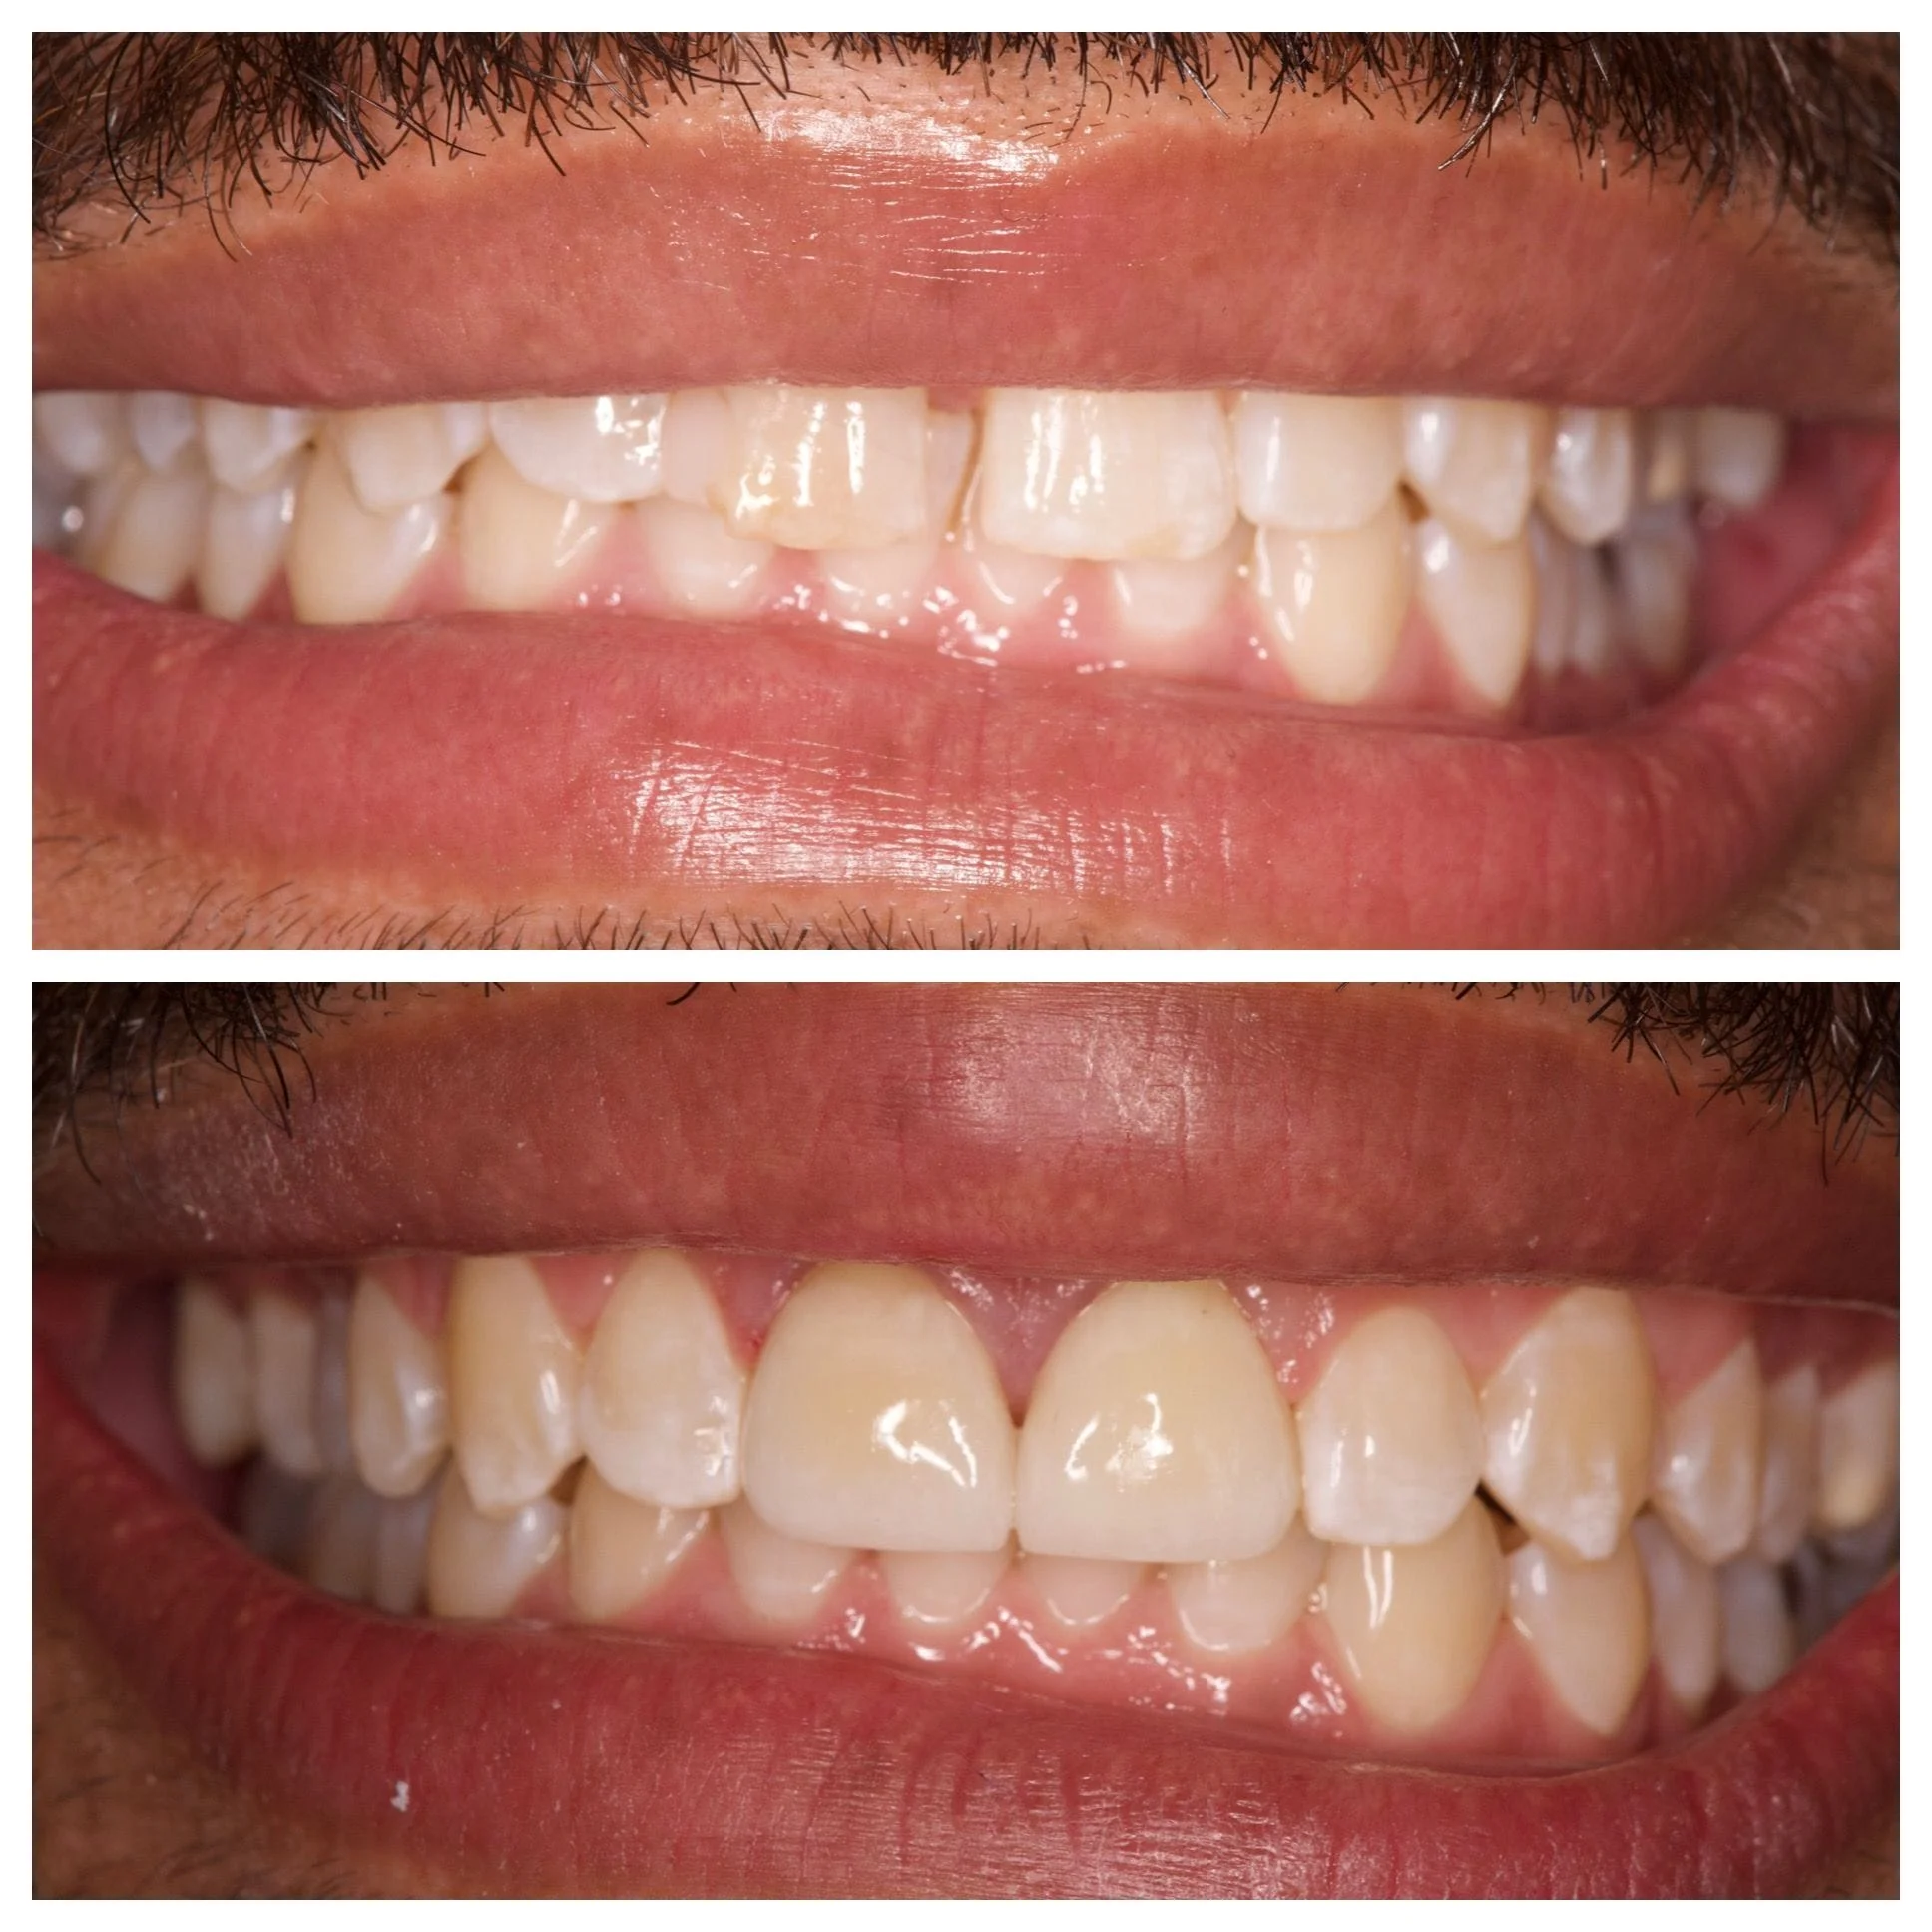 TWO CROWNS TO ENHANCE THE SMILE AND CLOSE THE GAP